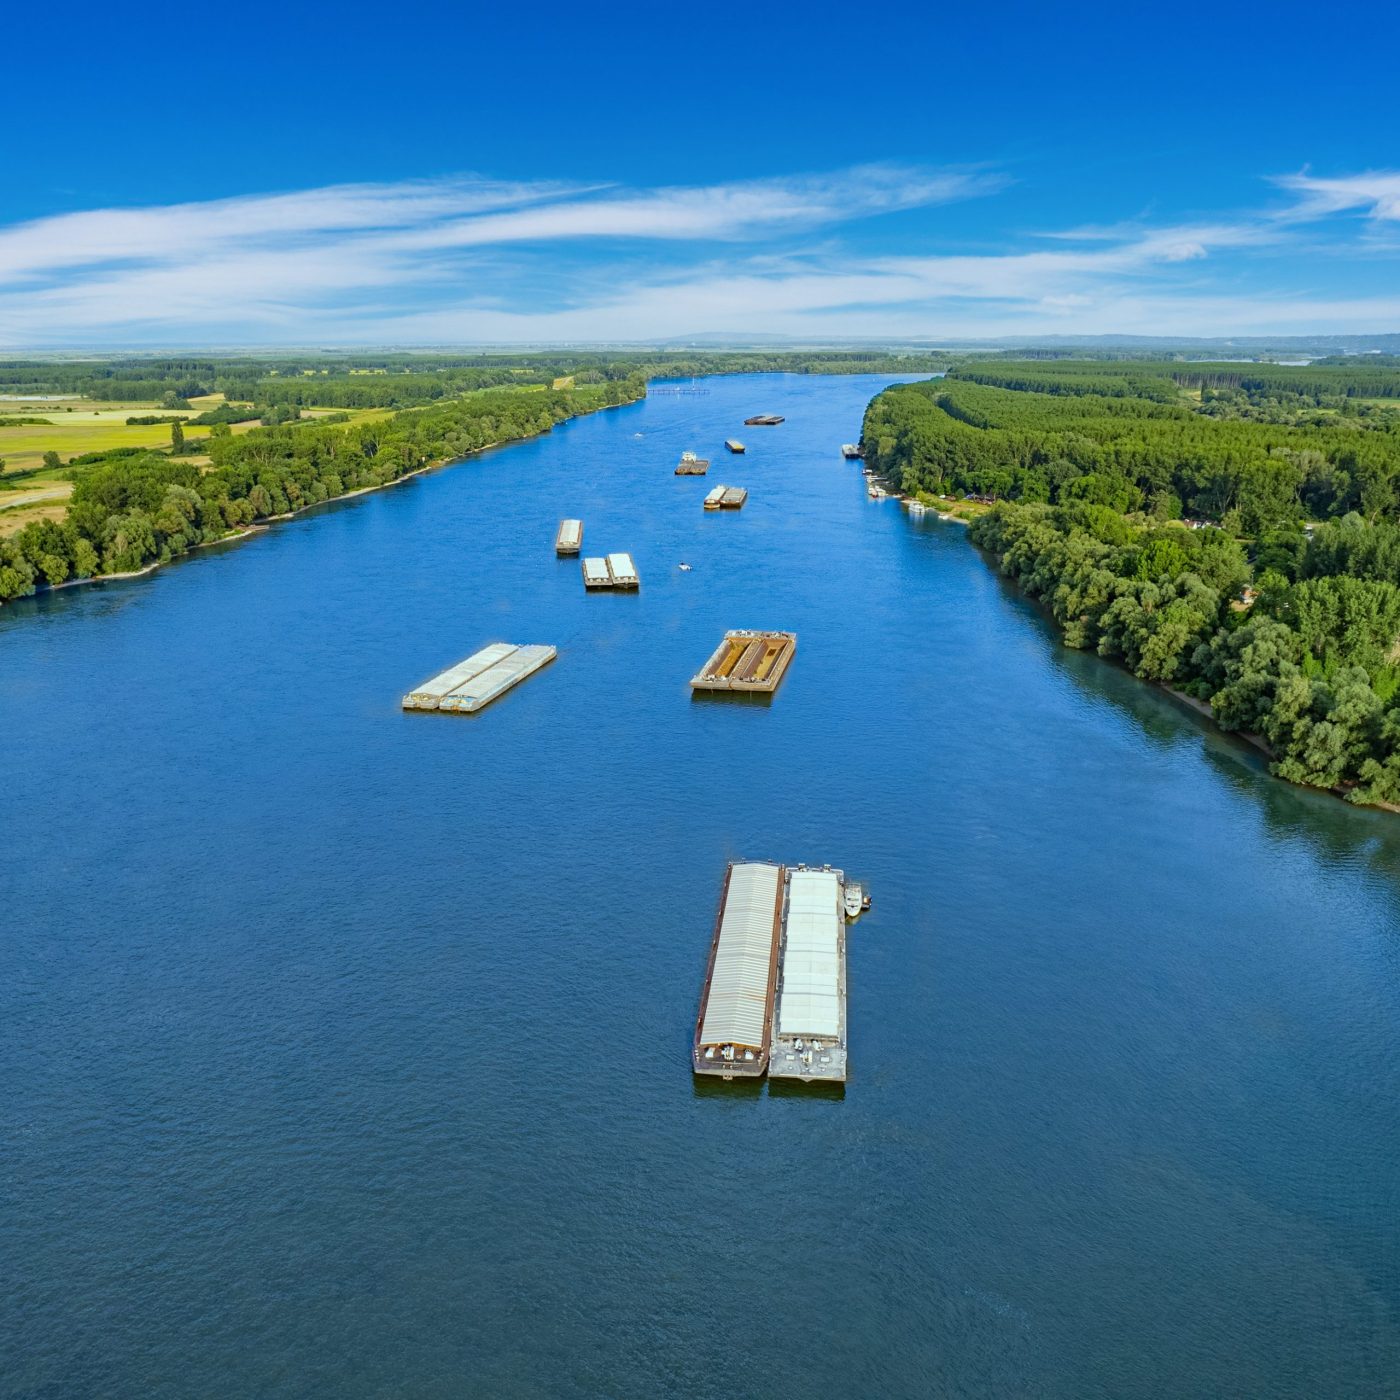 Several barges on the Danube aerial view.